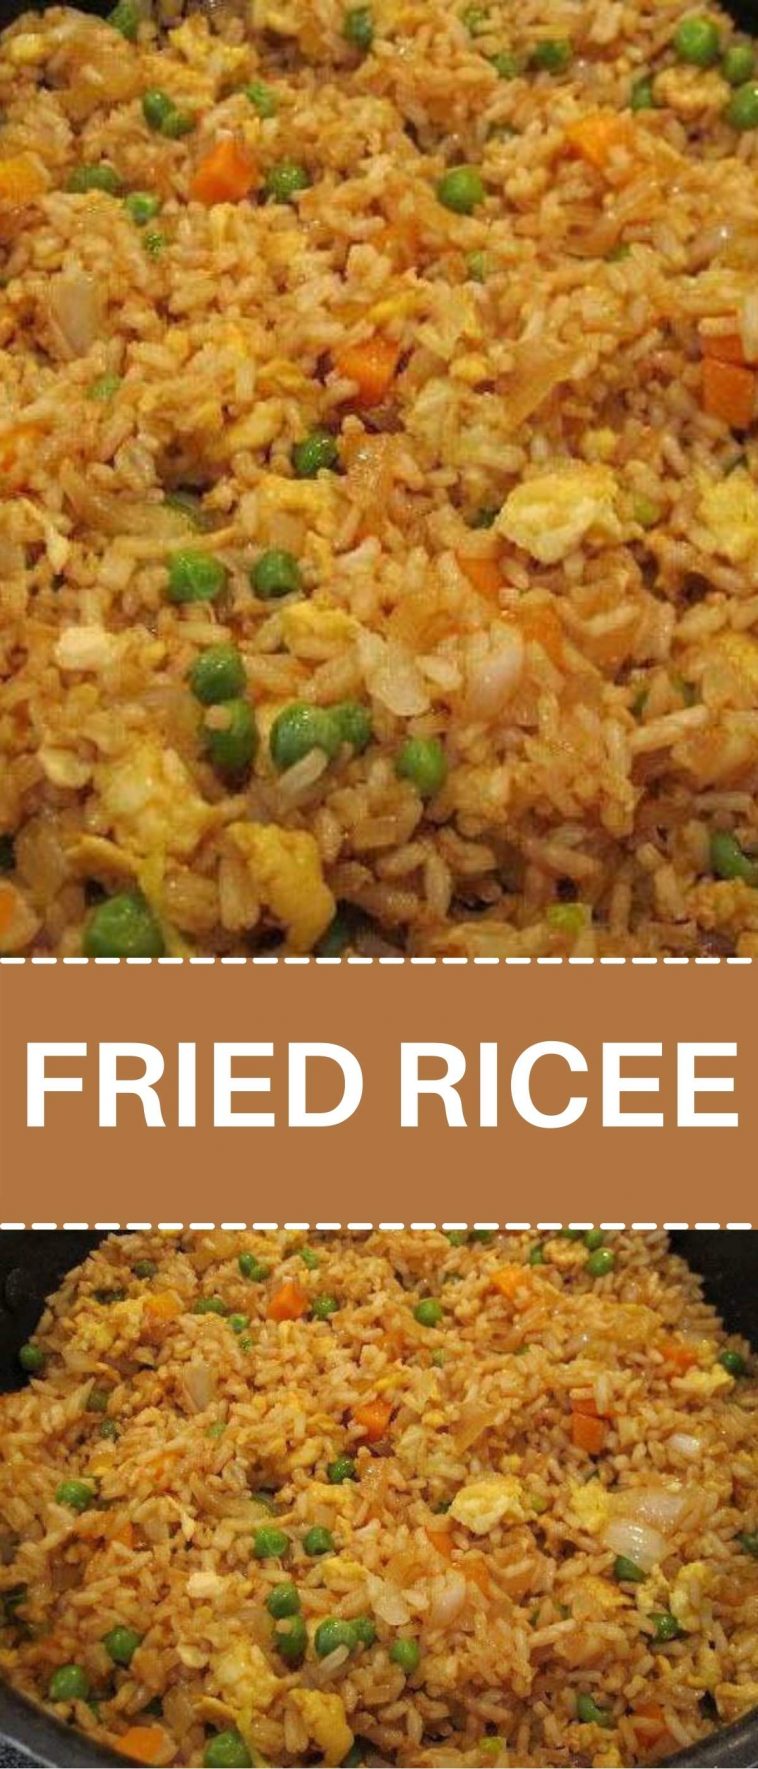 FRIED RICE (OVER 20,000 REVIEWS) SHARE TO SAVE ON YOUR TIMELINE